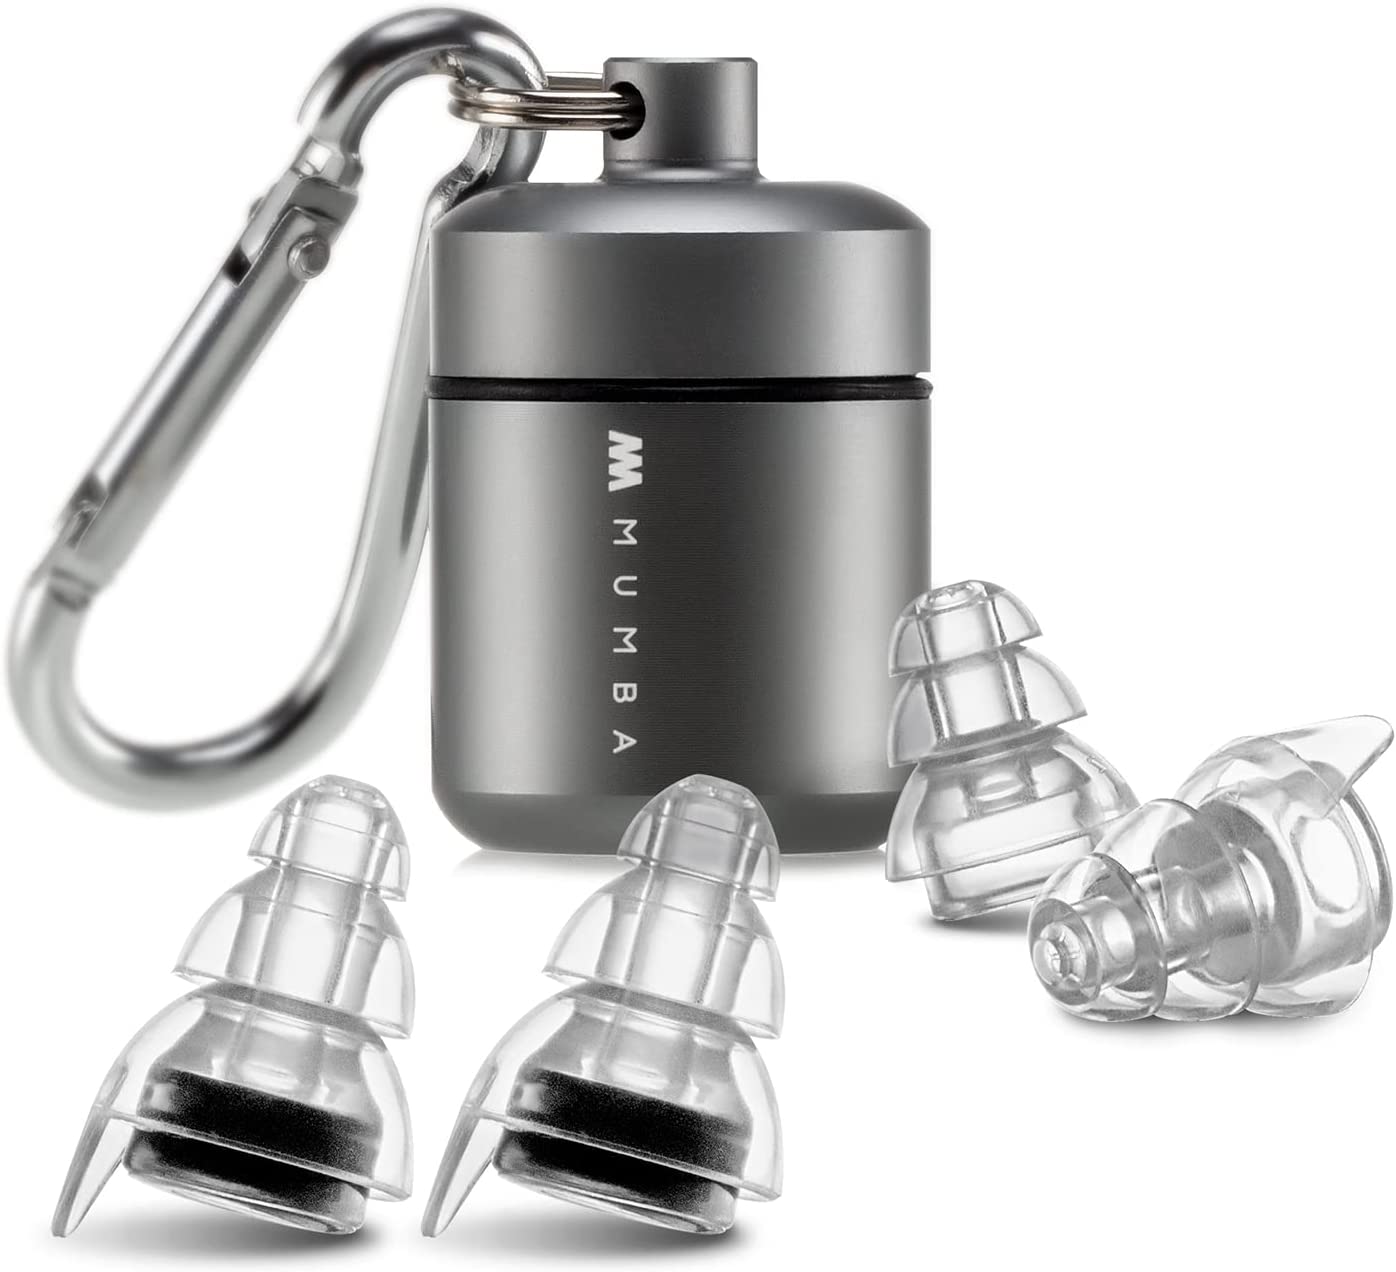 These earplugs help me protect my hearing at loud concerts, and they cost less than $30